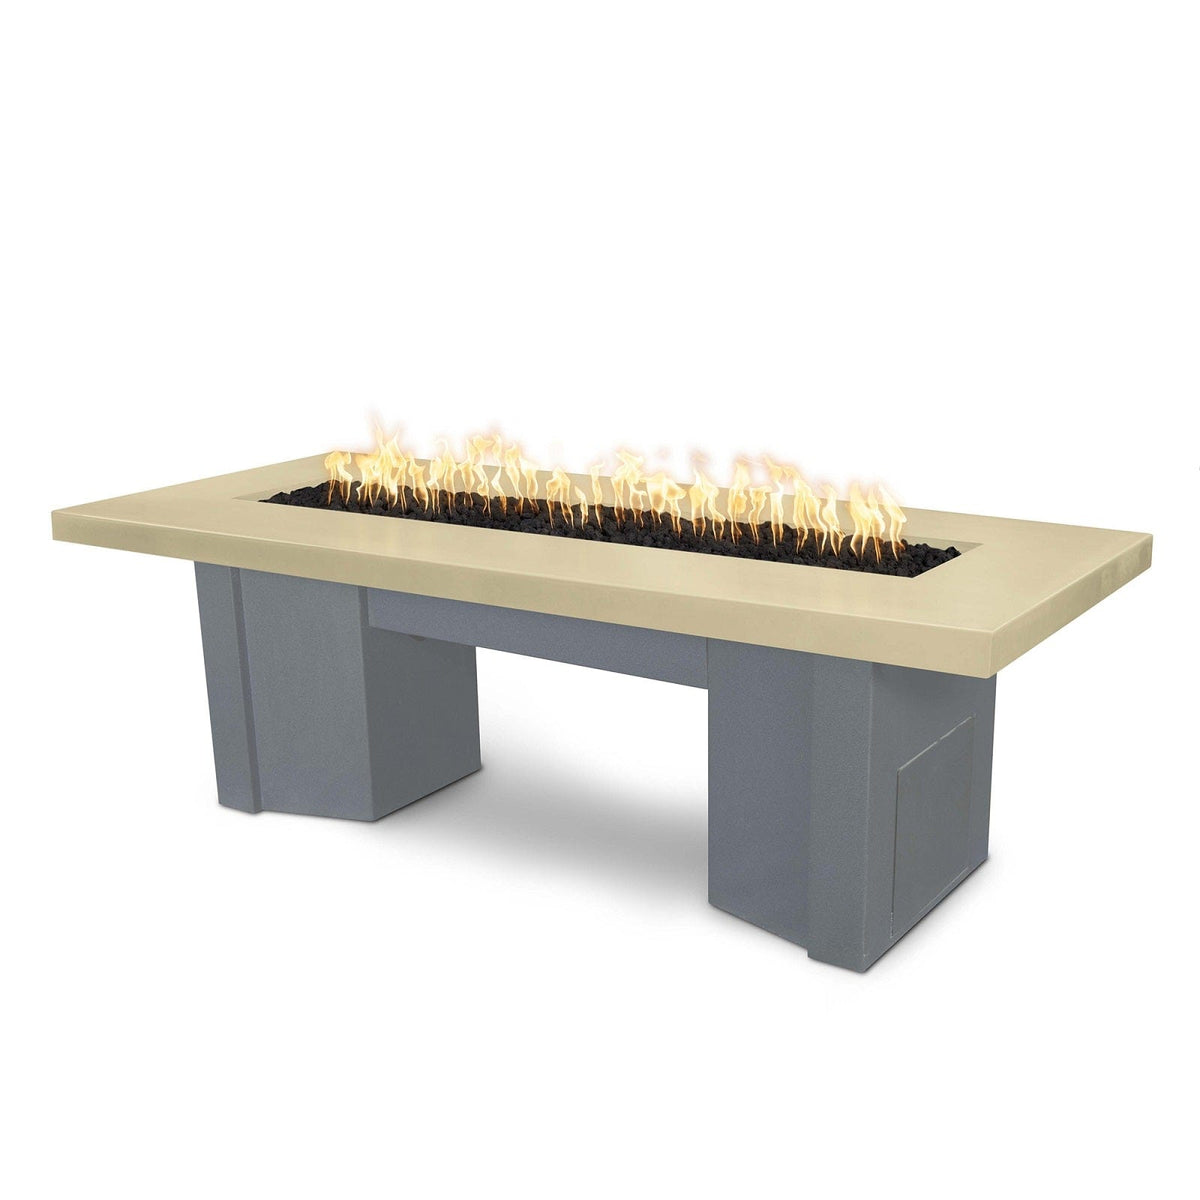 The Outdoor Plus Fire Features Vanilla (-VAN) / Gray Powder Coated Steel (-GRY) The Outdoor Plus 60&quot; Alameda Fire Table Smooth Concrete in Natural Gas - Flame Sense System with Push Button Spark Igniter / OPT-ALMGFRC60FSEN-NG